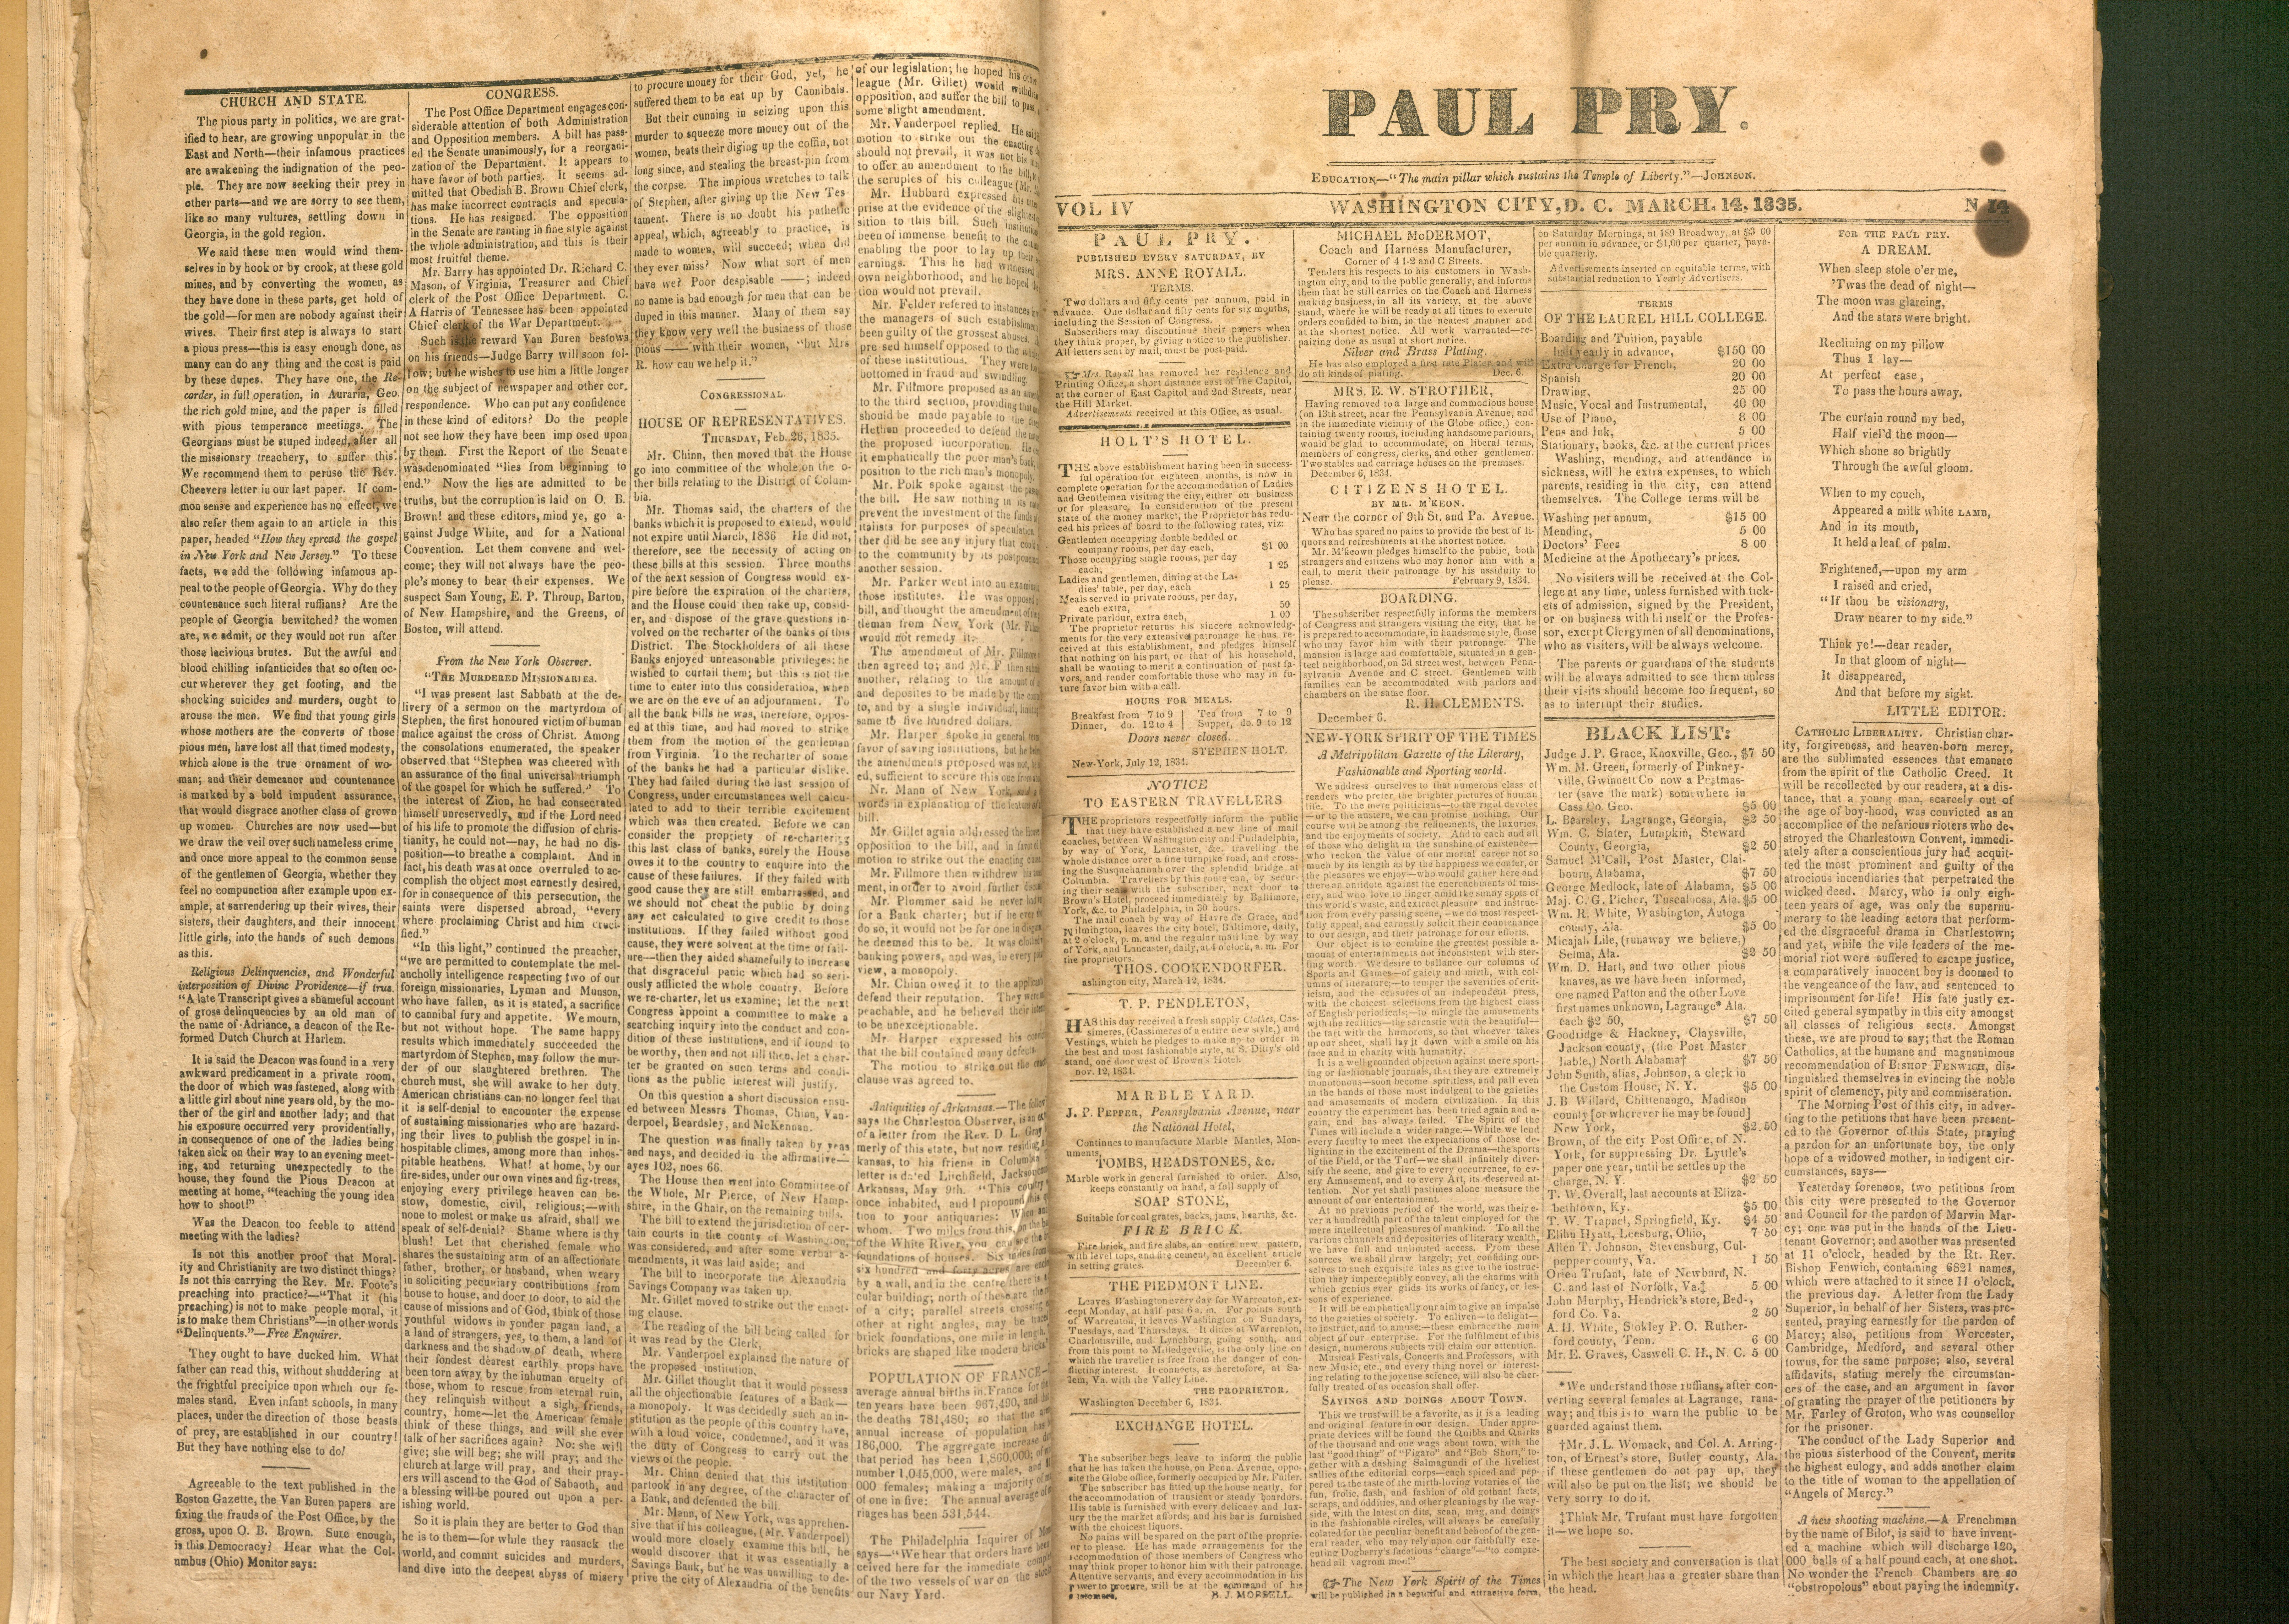 Image of the front page of a newspaper bound into book binding with visible text of title Paul Pry.